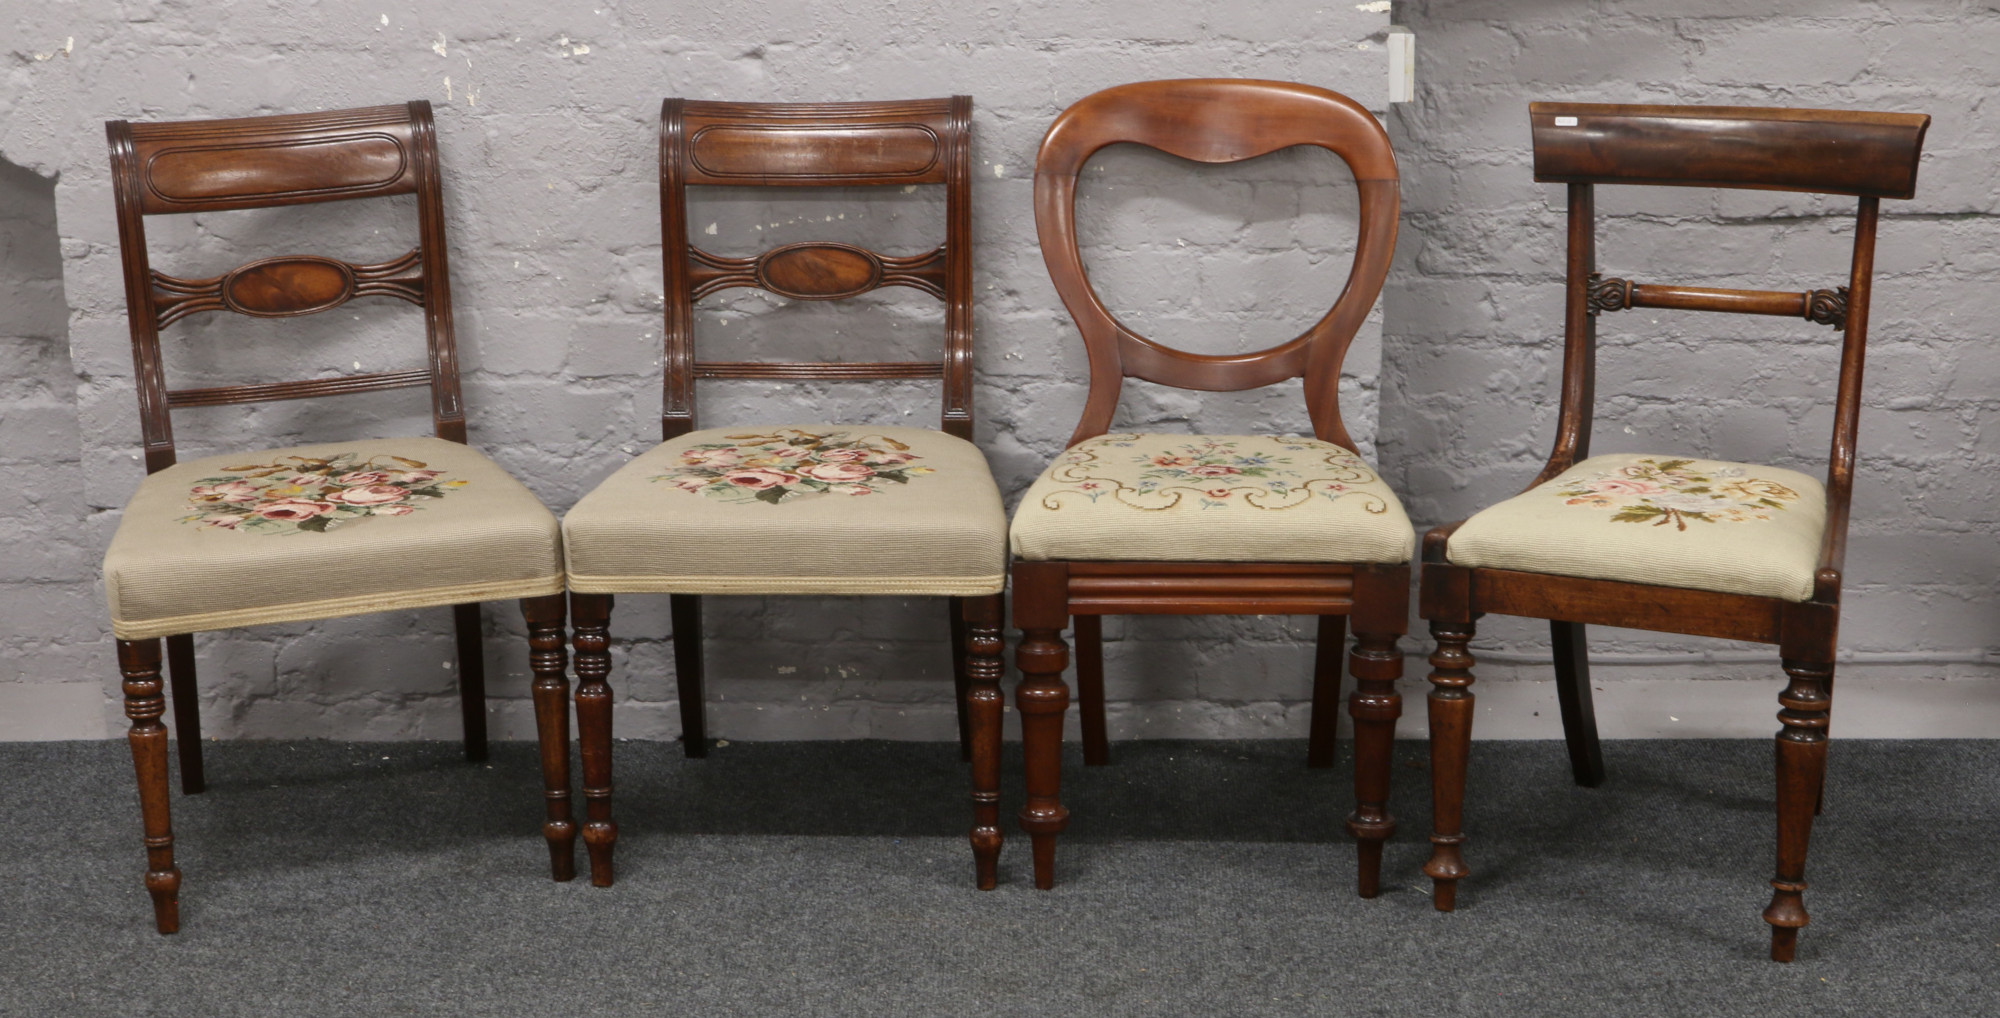 A Harlequin set of four Victorian chairs.